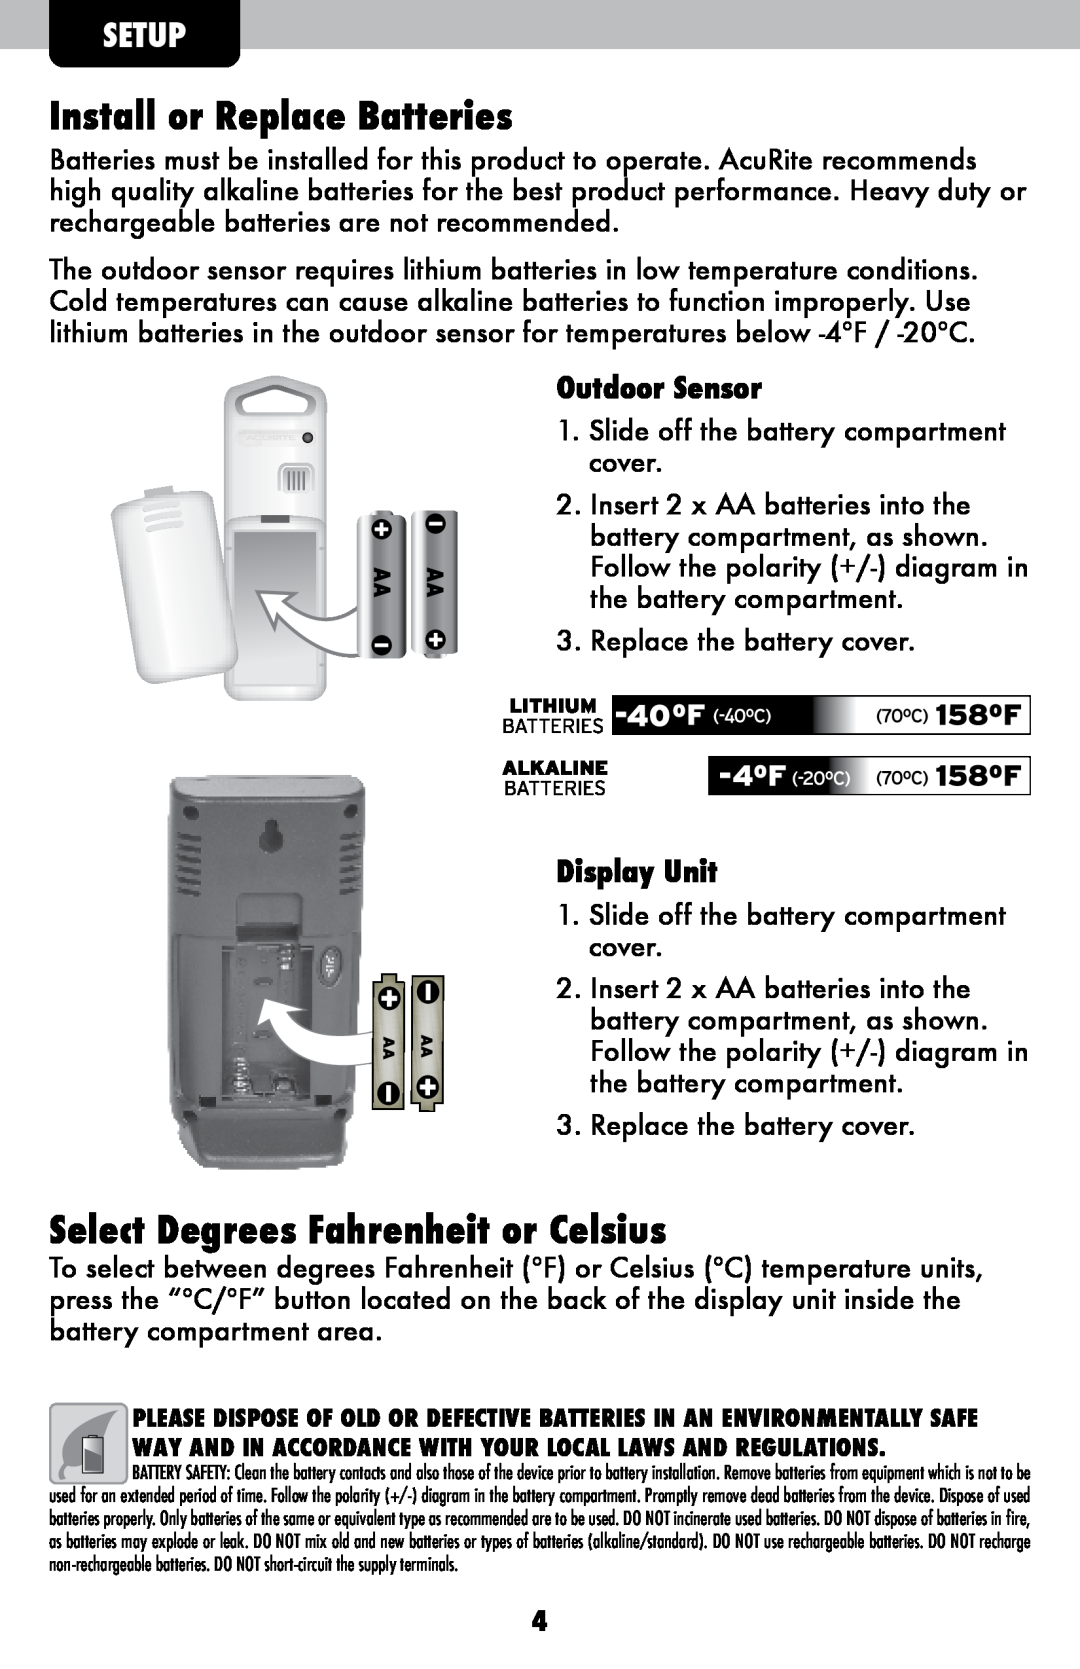 Acu-Rite 822 Install or Replace Batteries, Select Degrees Fahrenheit or Celsius, Setup, Outdoor Sensor, Display Unit 